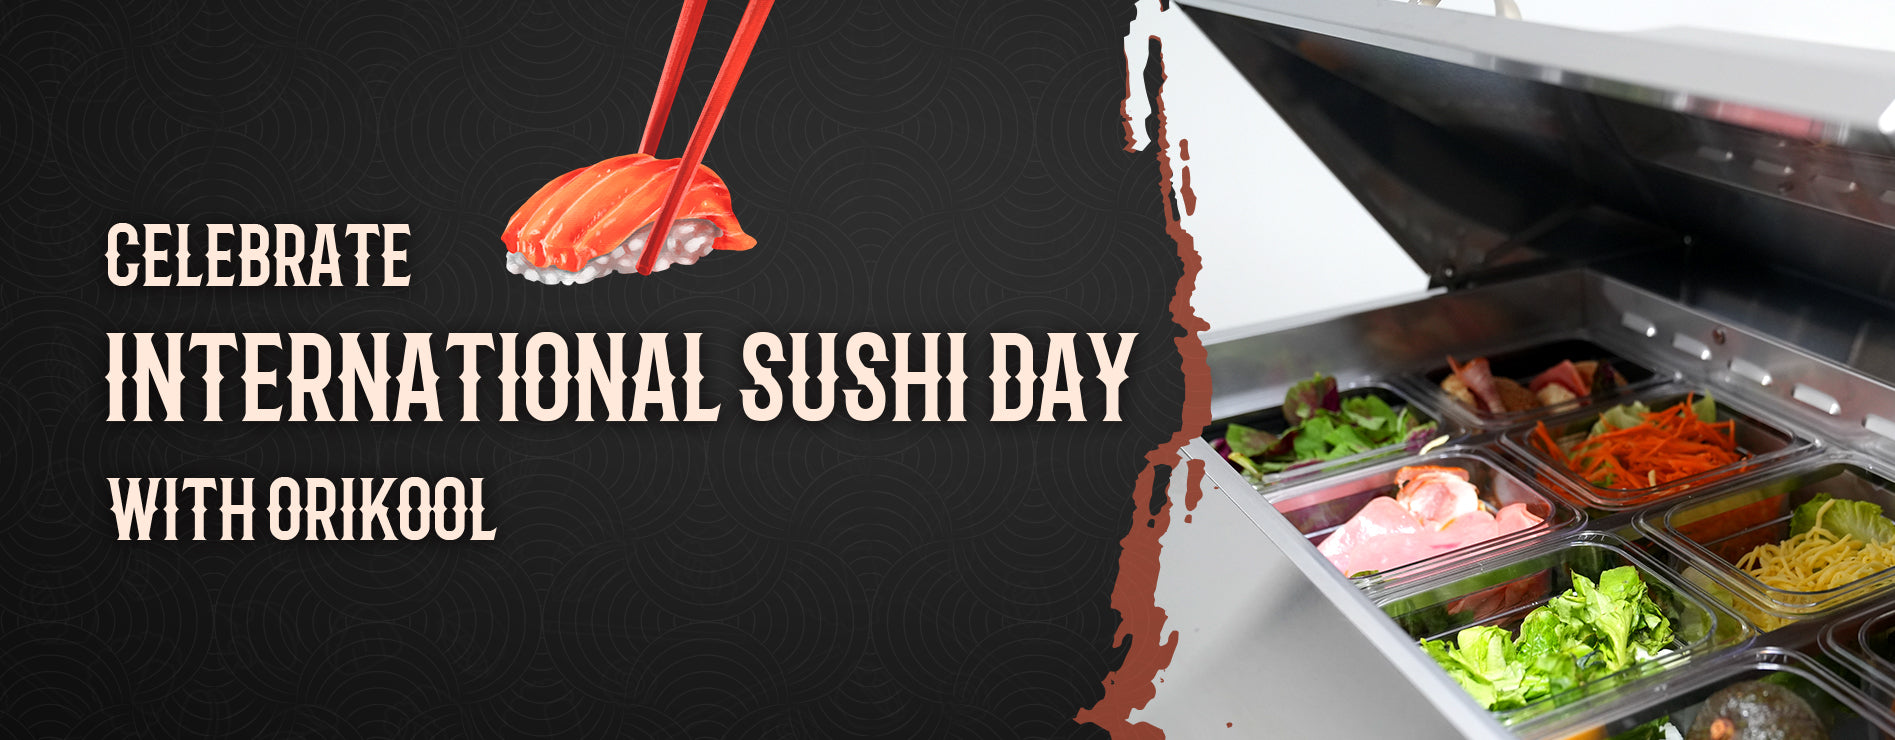 Celebrating International Sushi Day: The Role of Commercial Refrigerators